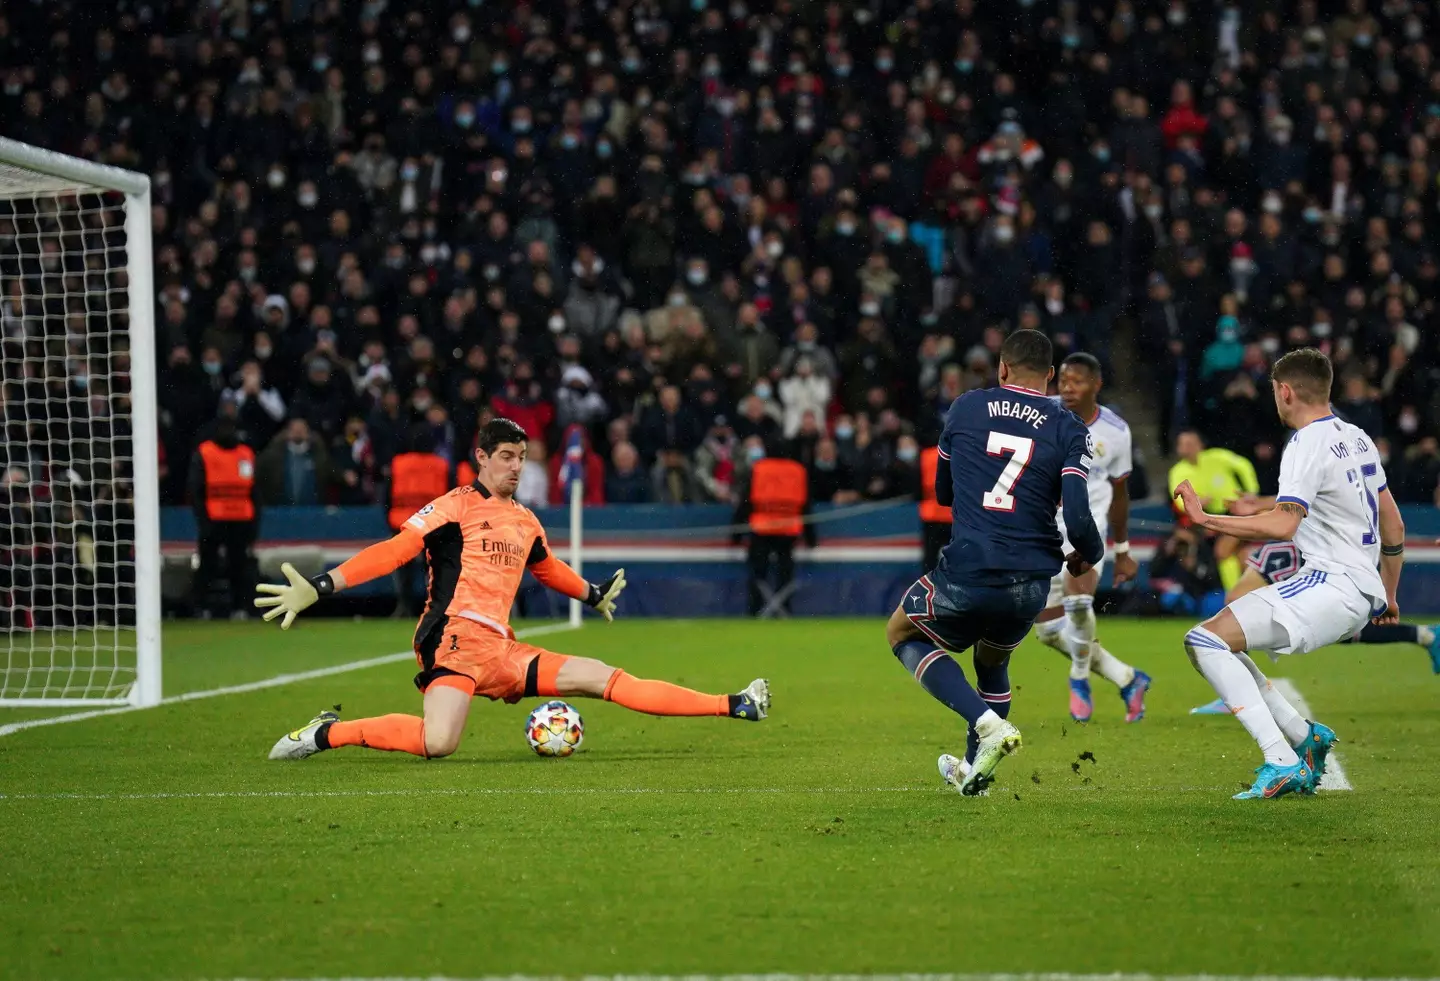 Mbappe scored against Real Madrid this season in the Champions League. Image